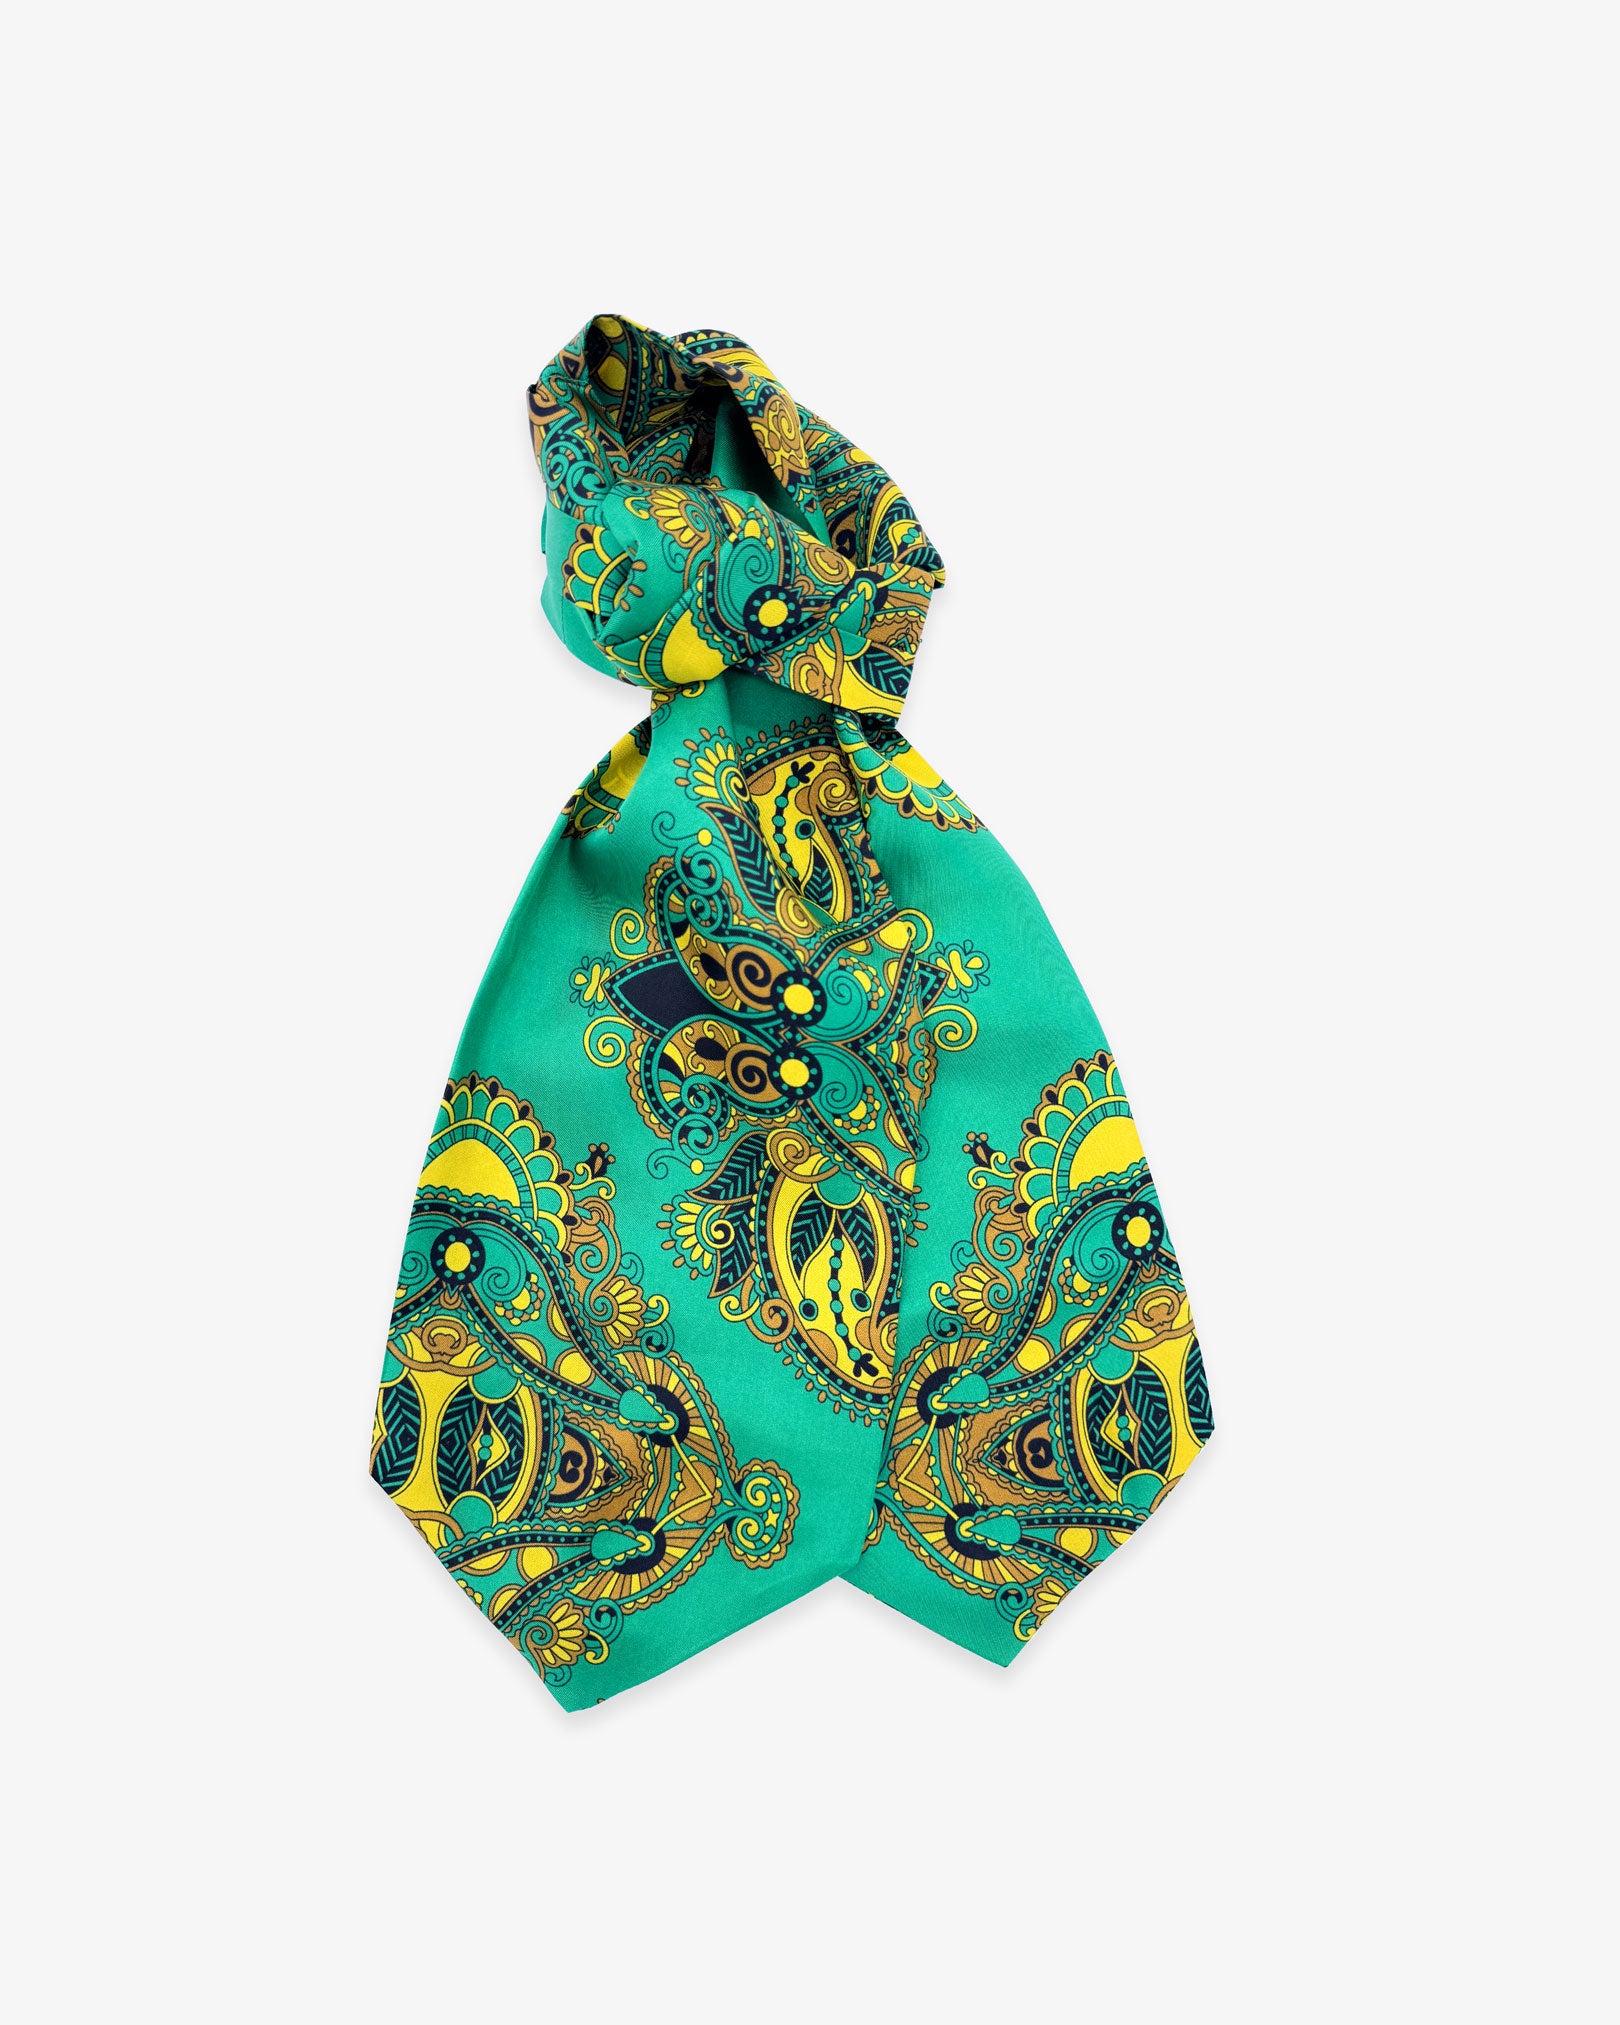 The Forks double Ascot tie with wide ends at the bottom and clear view of the gold paisley-Fleur de Lis patterns on a vibrant green background.